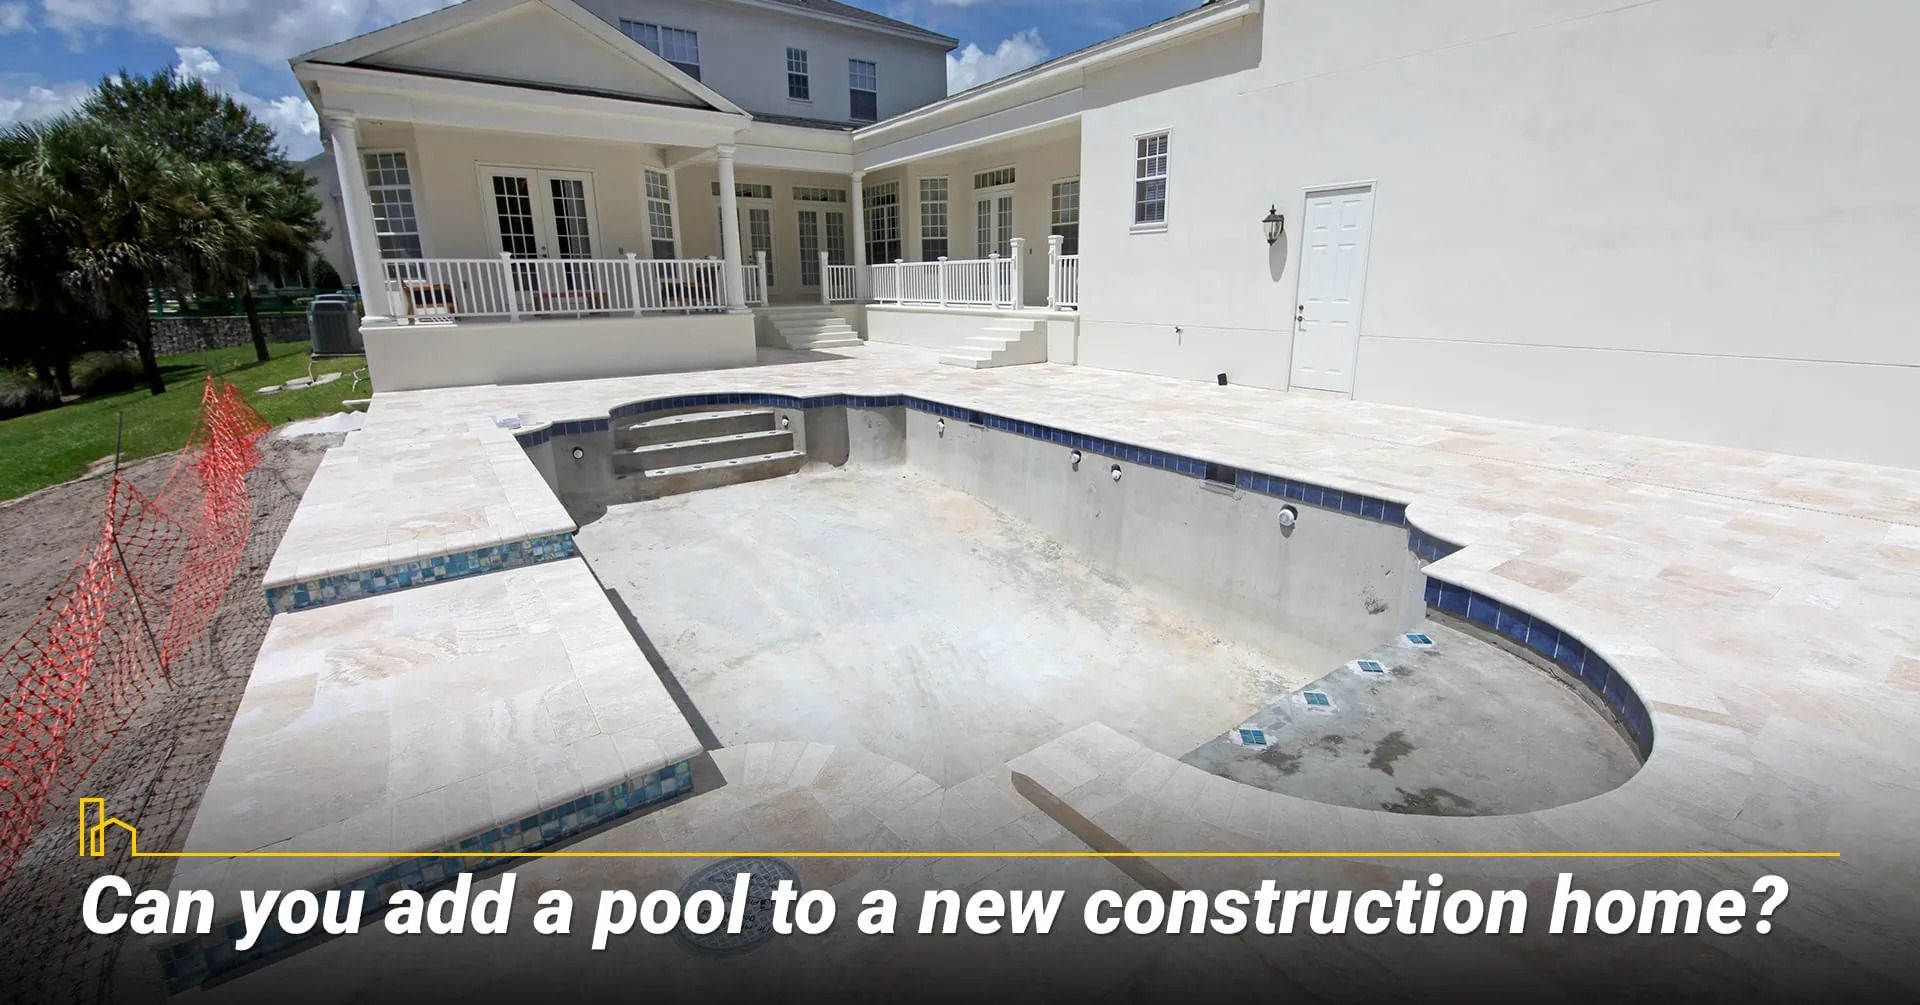 Can you add a pool to a new construction home?